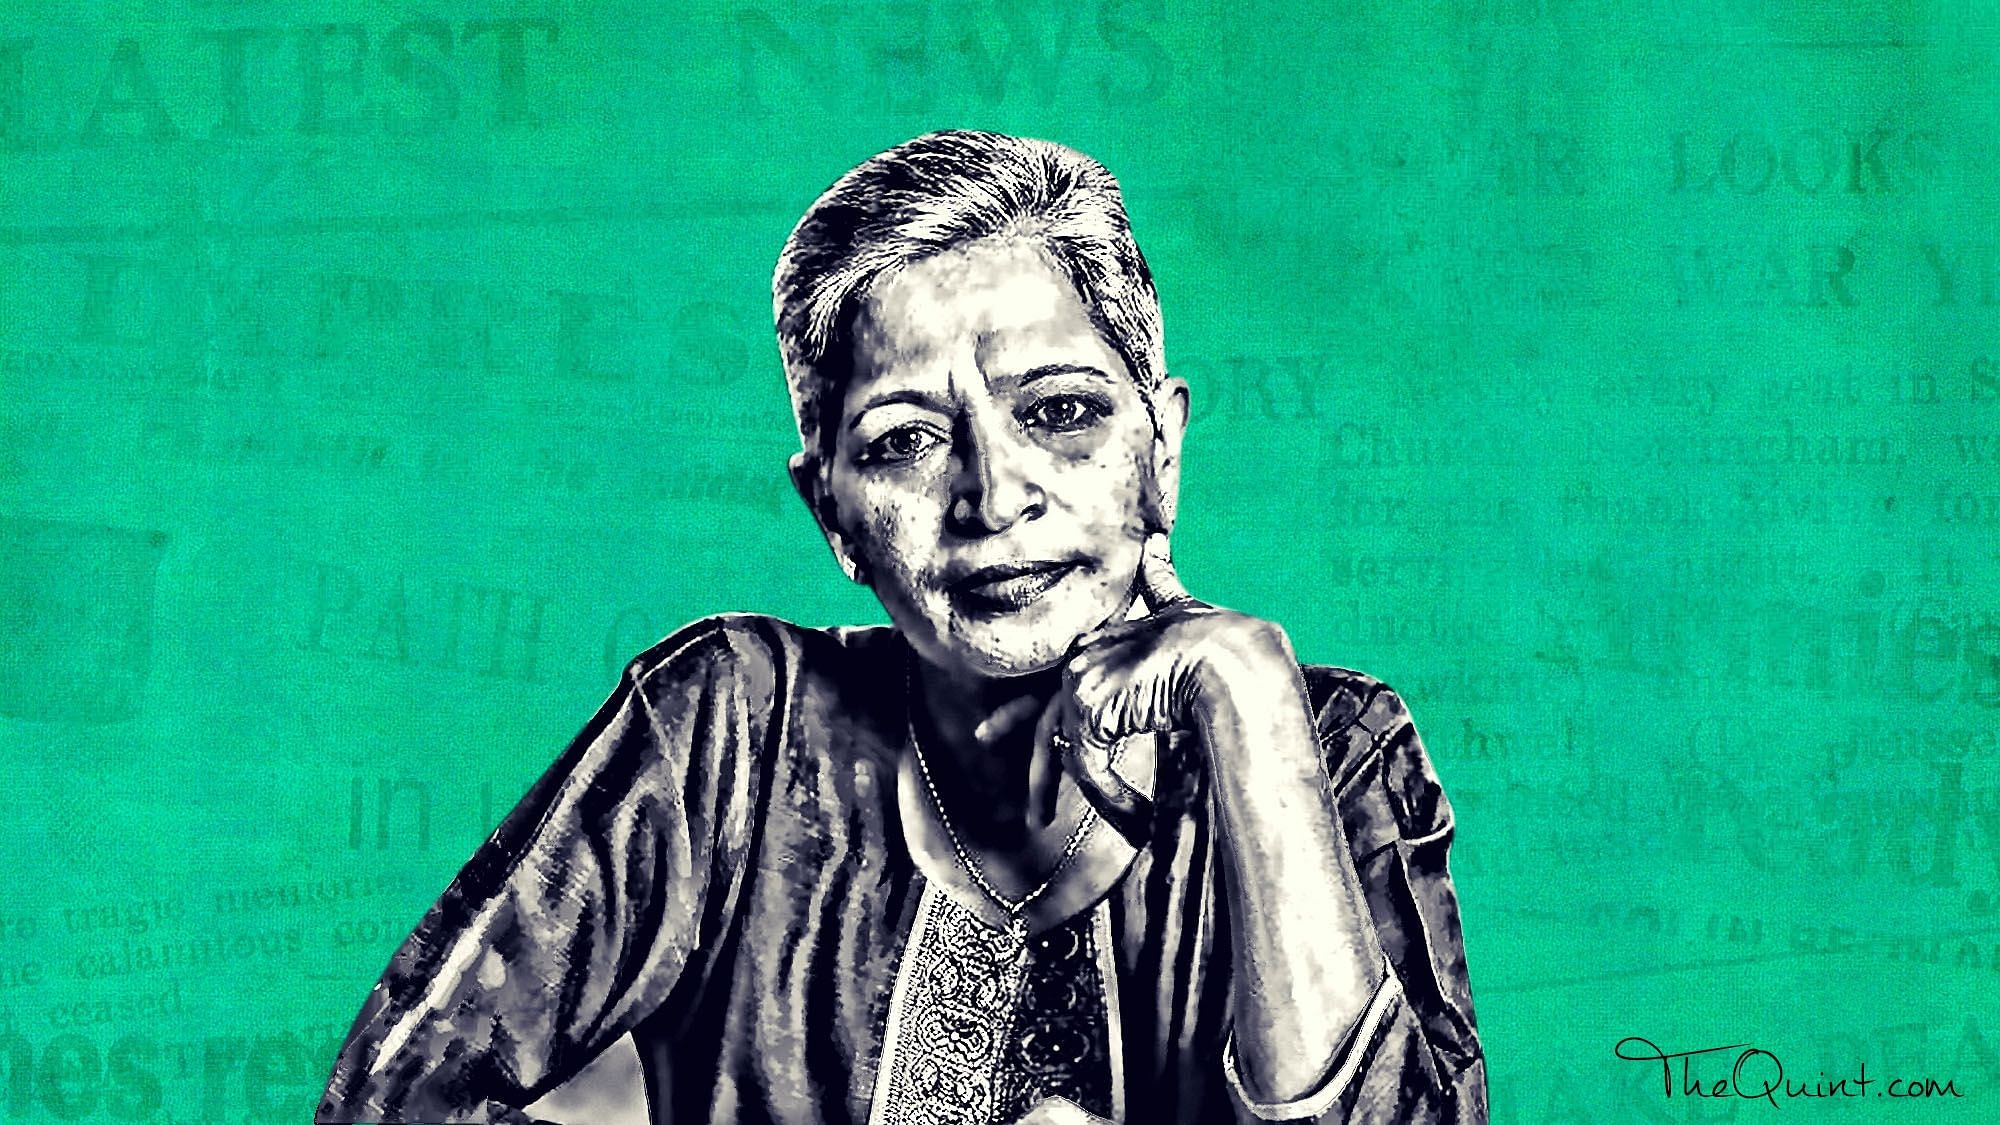 Indian journalist Gauri Lankesh was shot dead by three unidentified people outside her house in Bengaluru in September 2017.